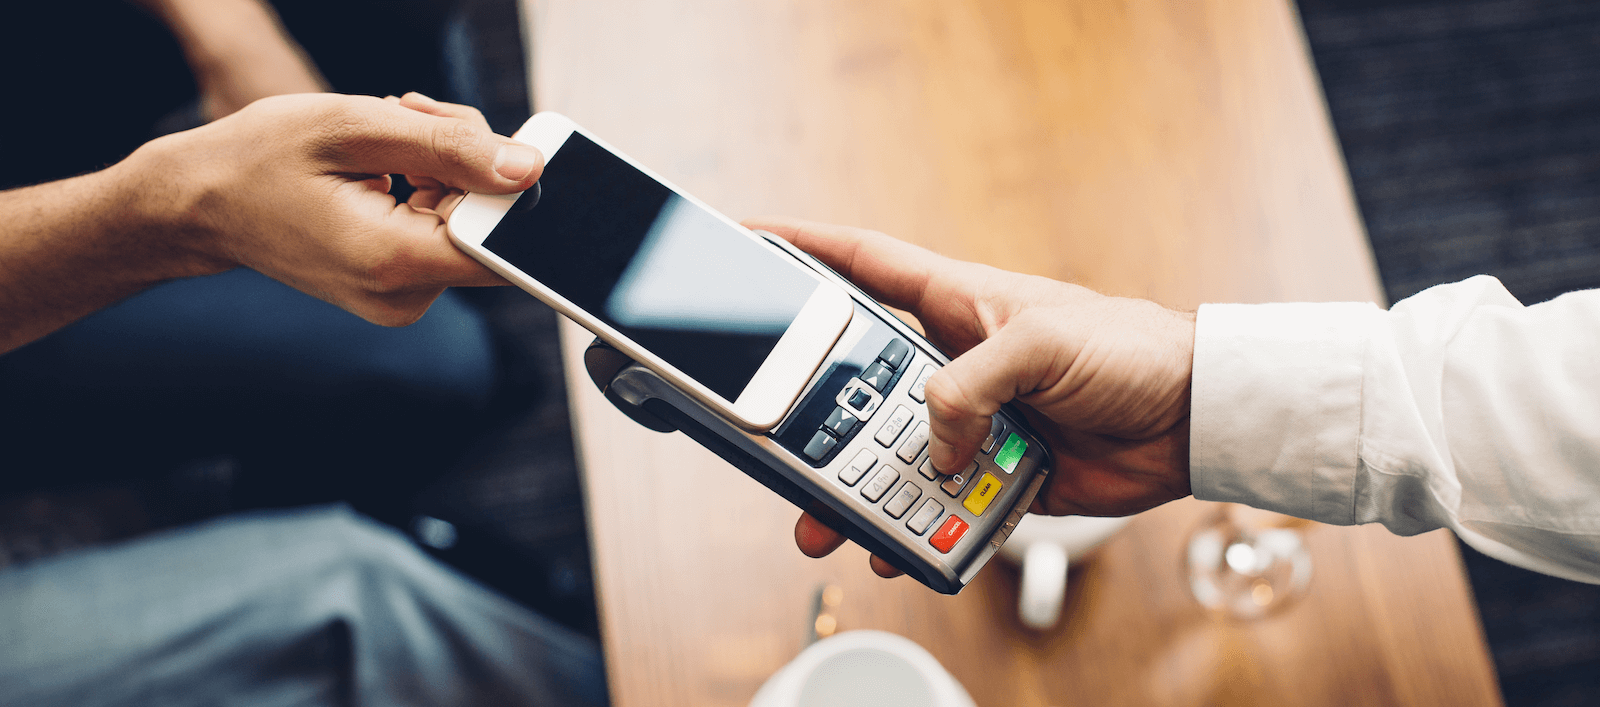 The Future of Mobile Wallets